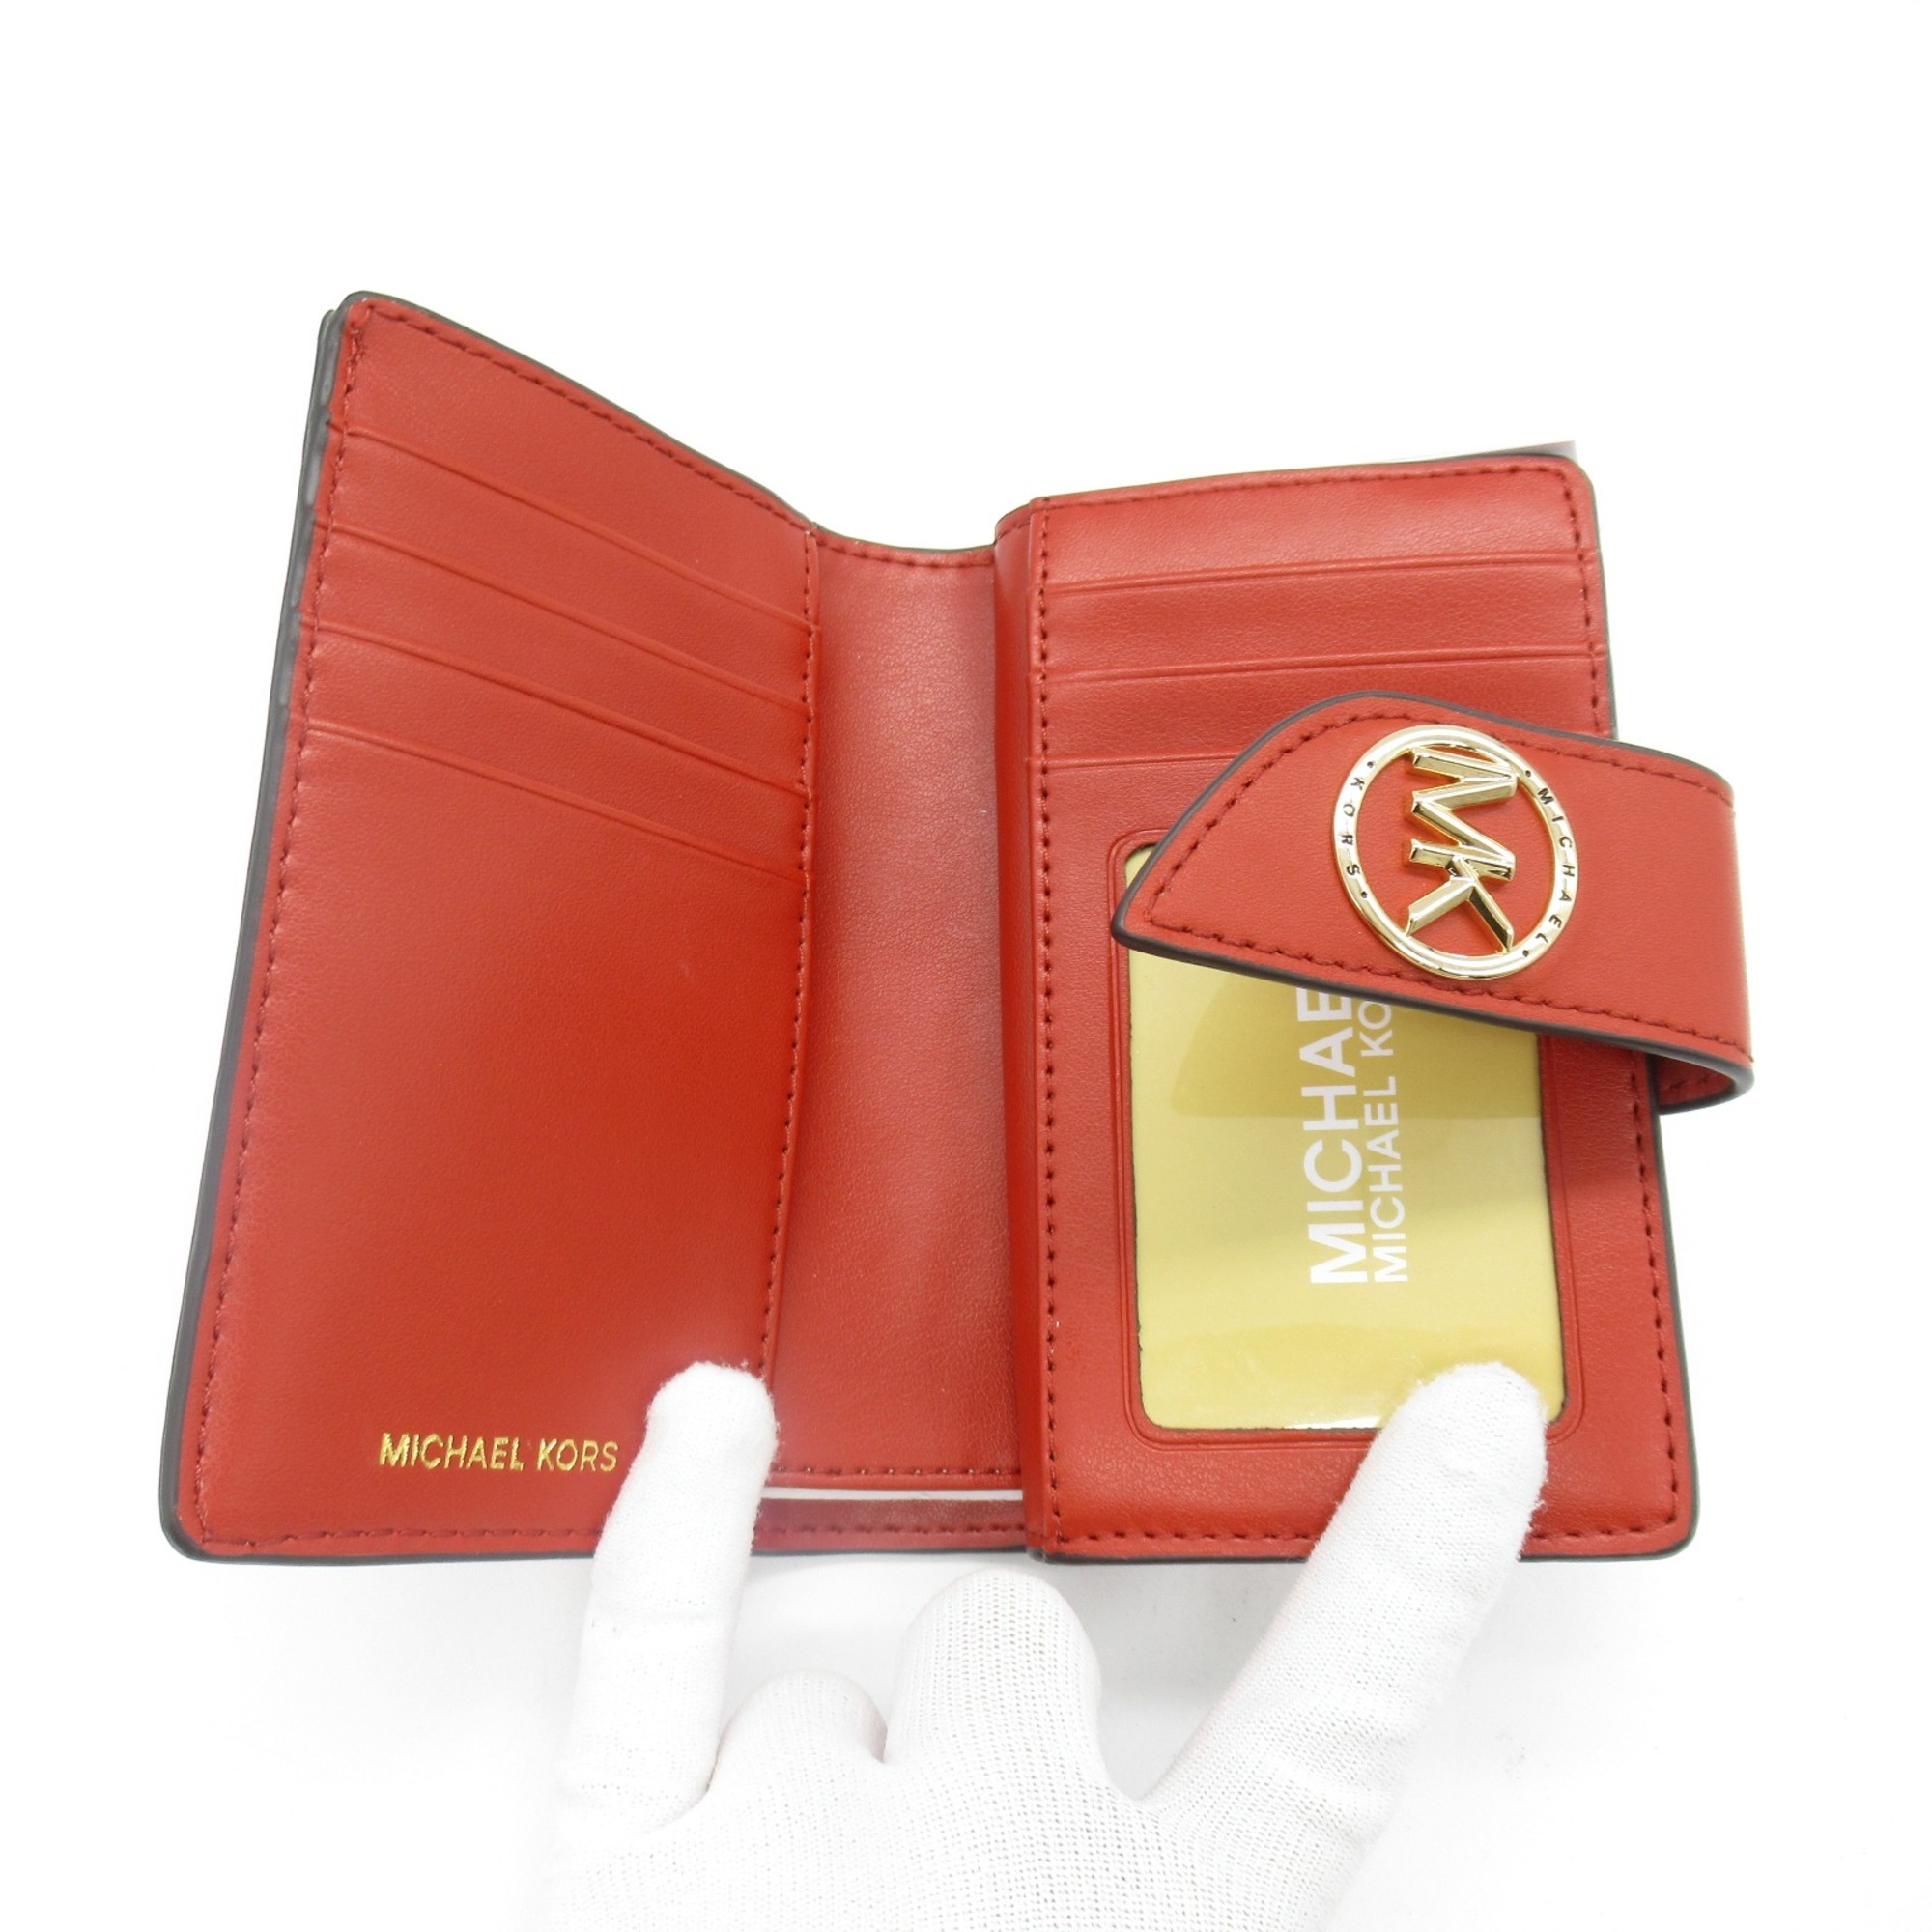 Michael Kors wallet Red terracotta leather 32F1GGRD8L808